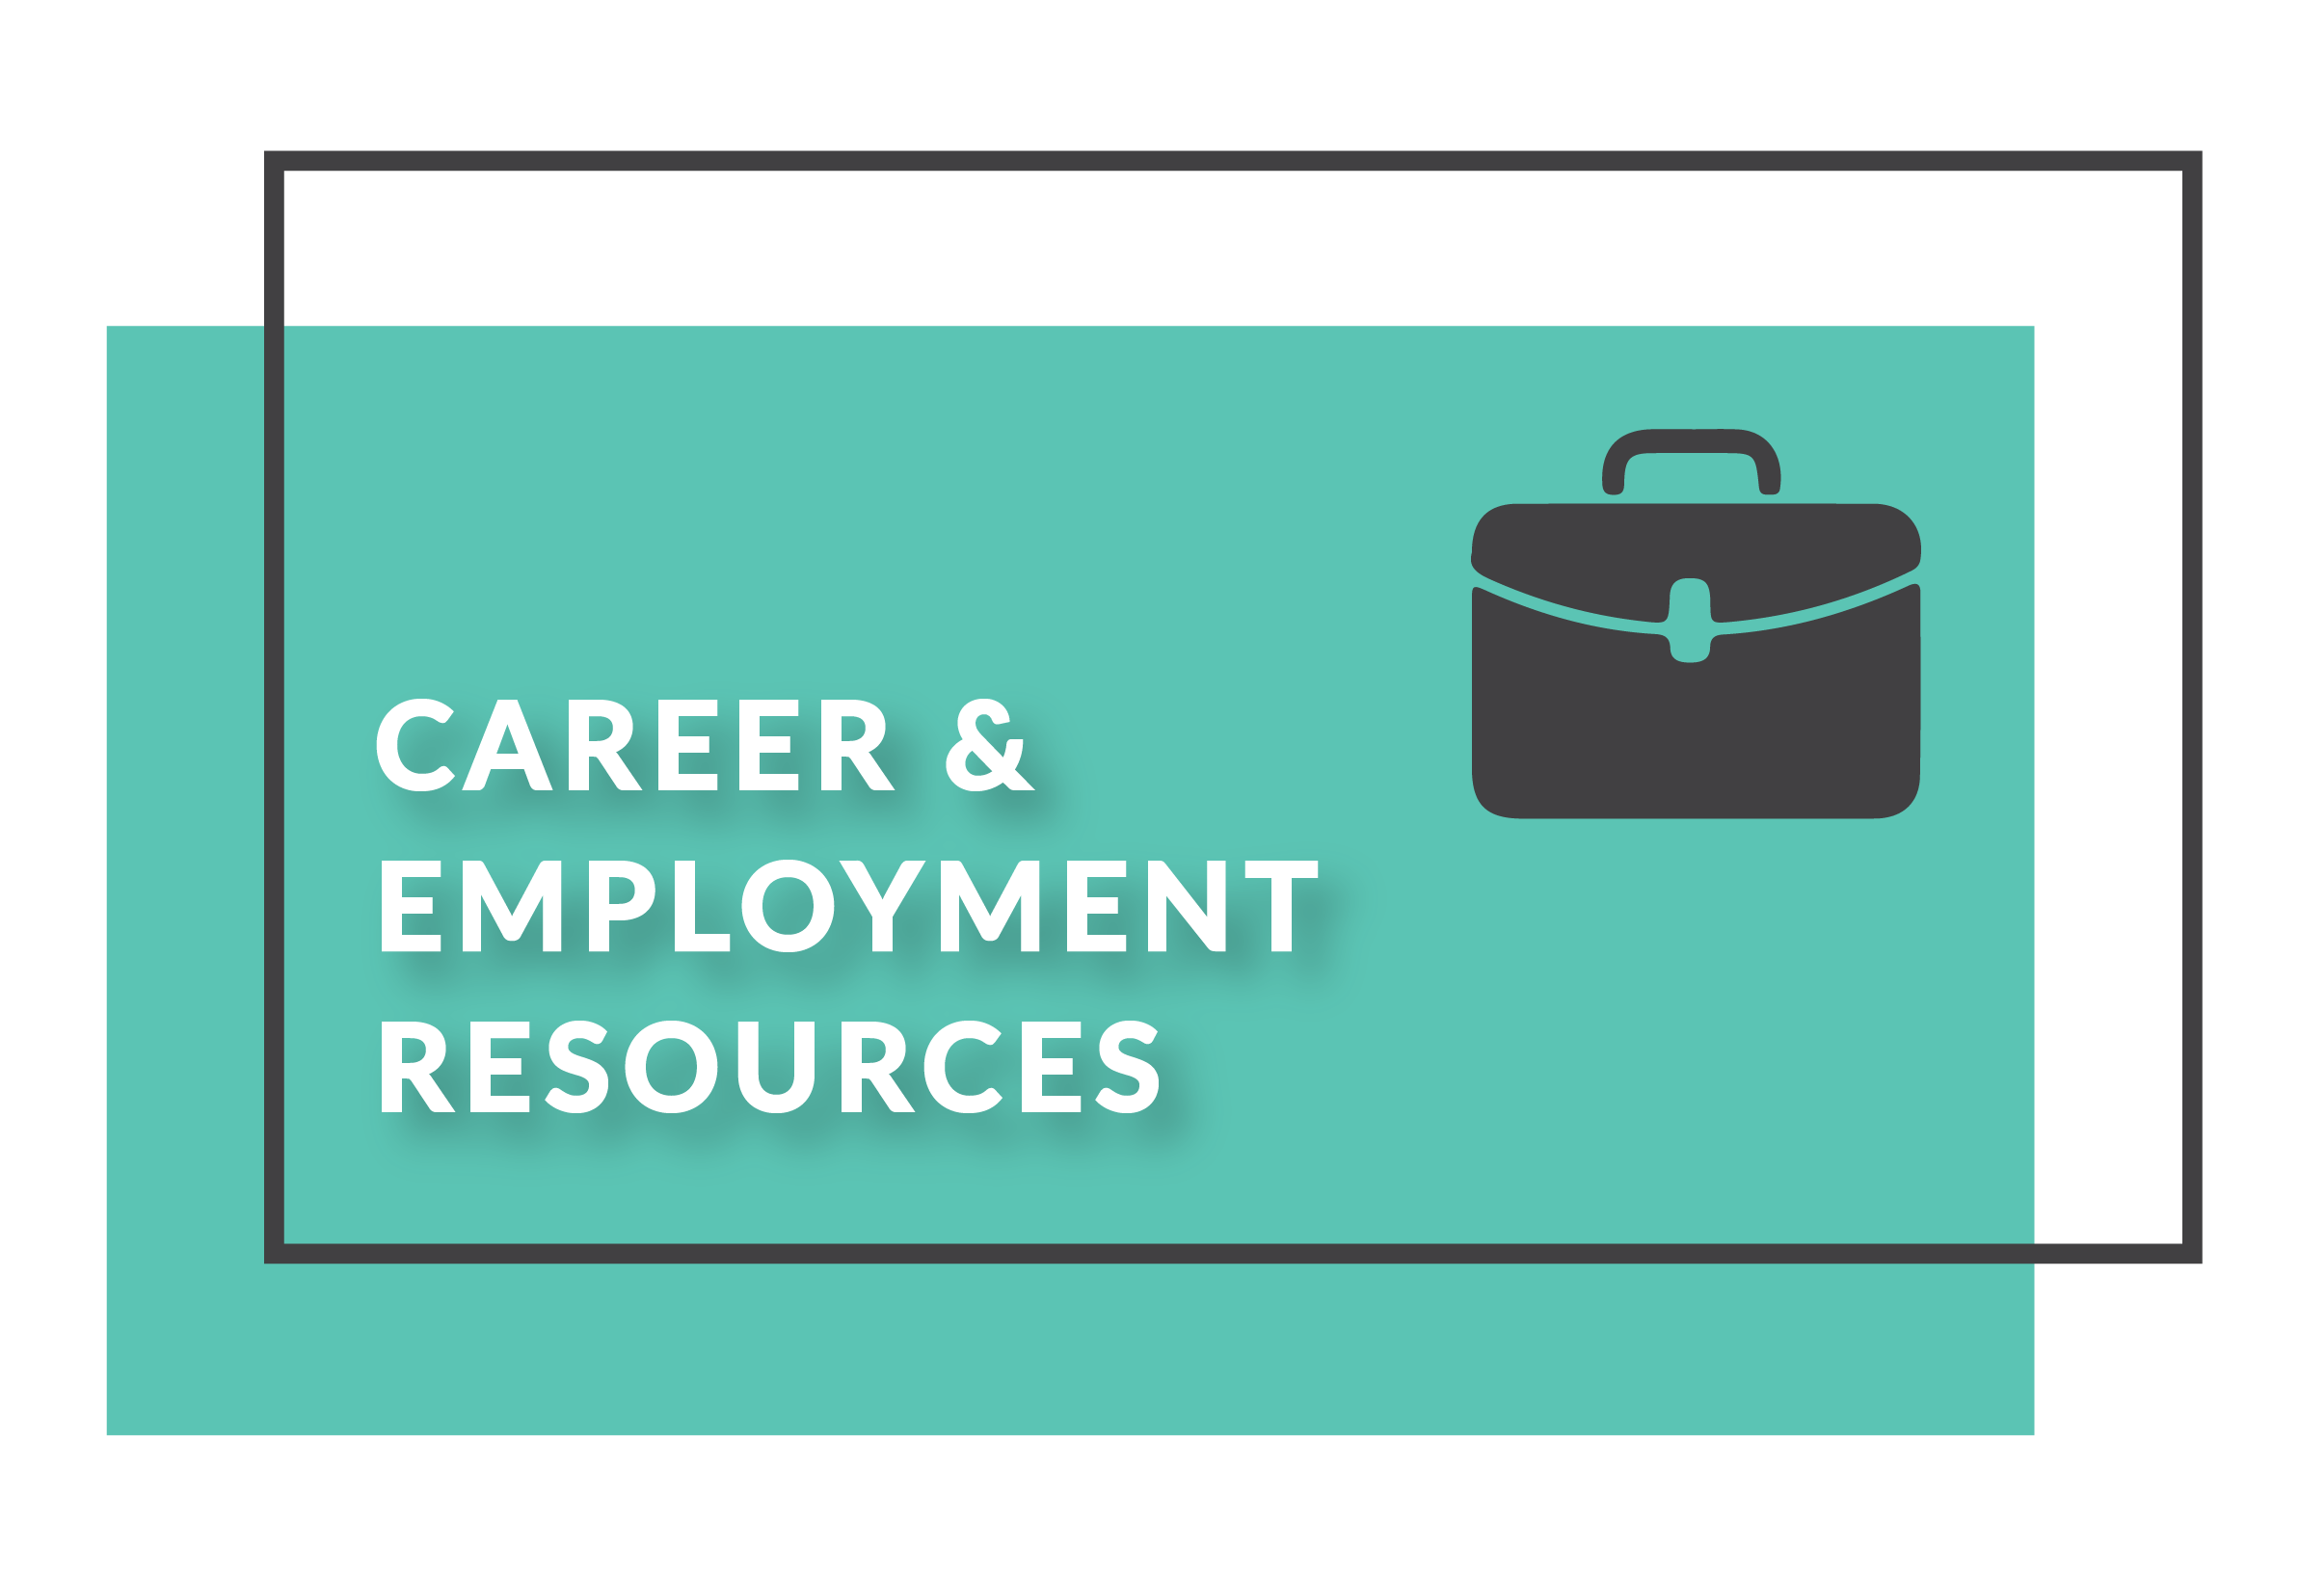 Career and employment resources